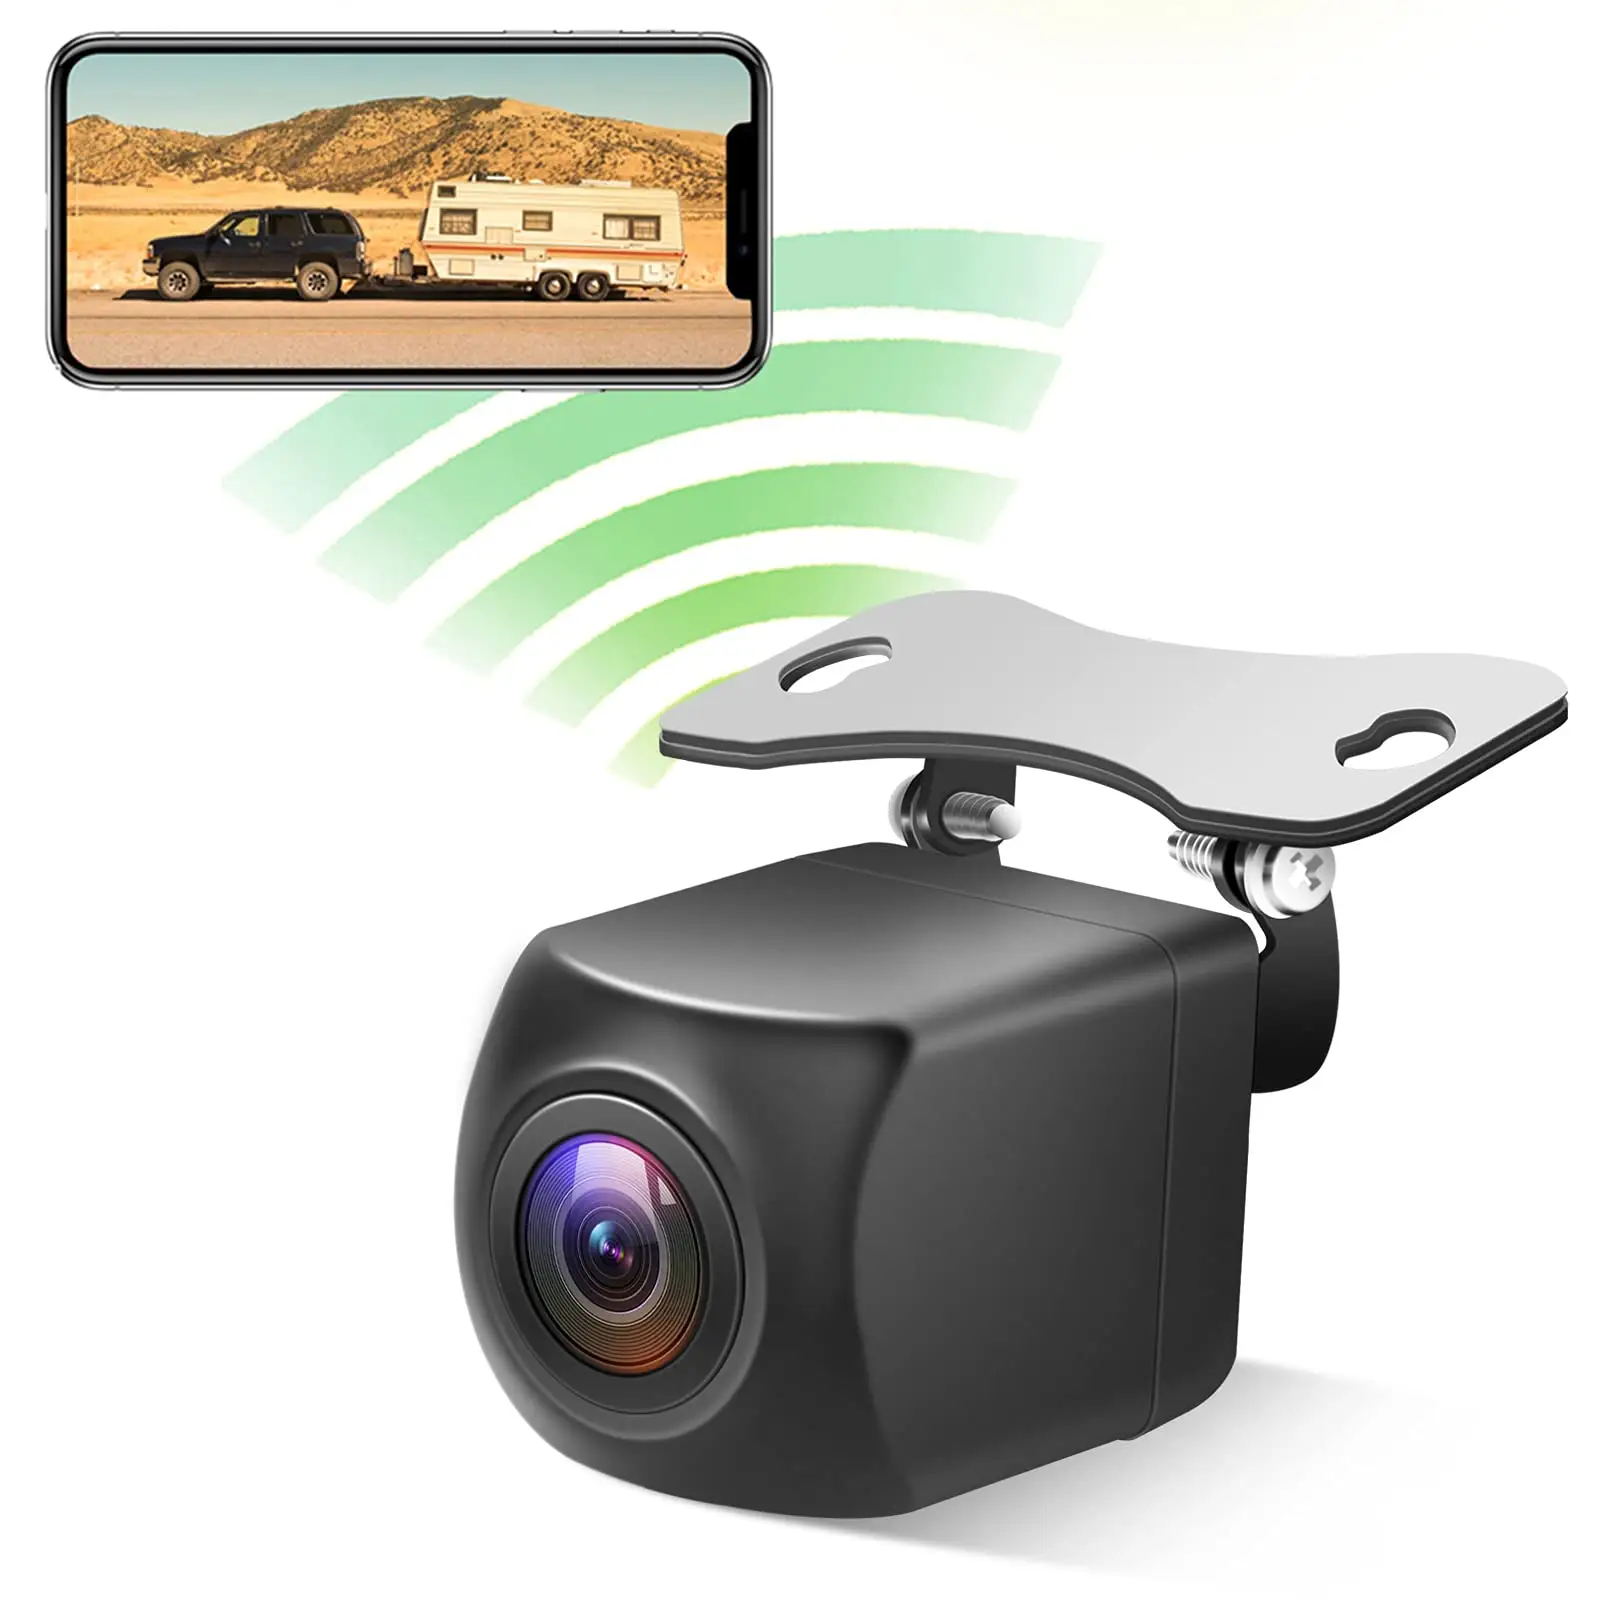 720P Wide Angle IP67 Waterproof Wireless Rear View Reverse Car Bus Backup Camera With IOS/Android App